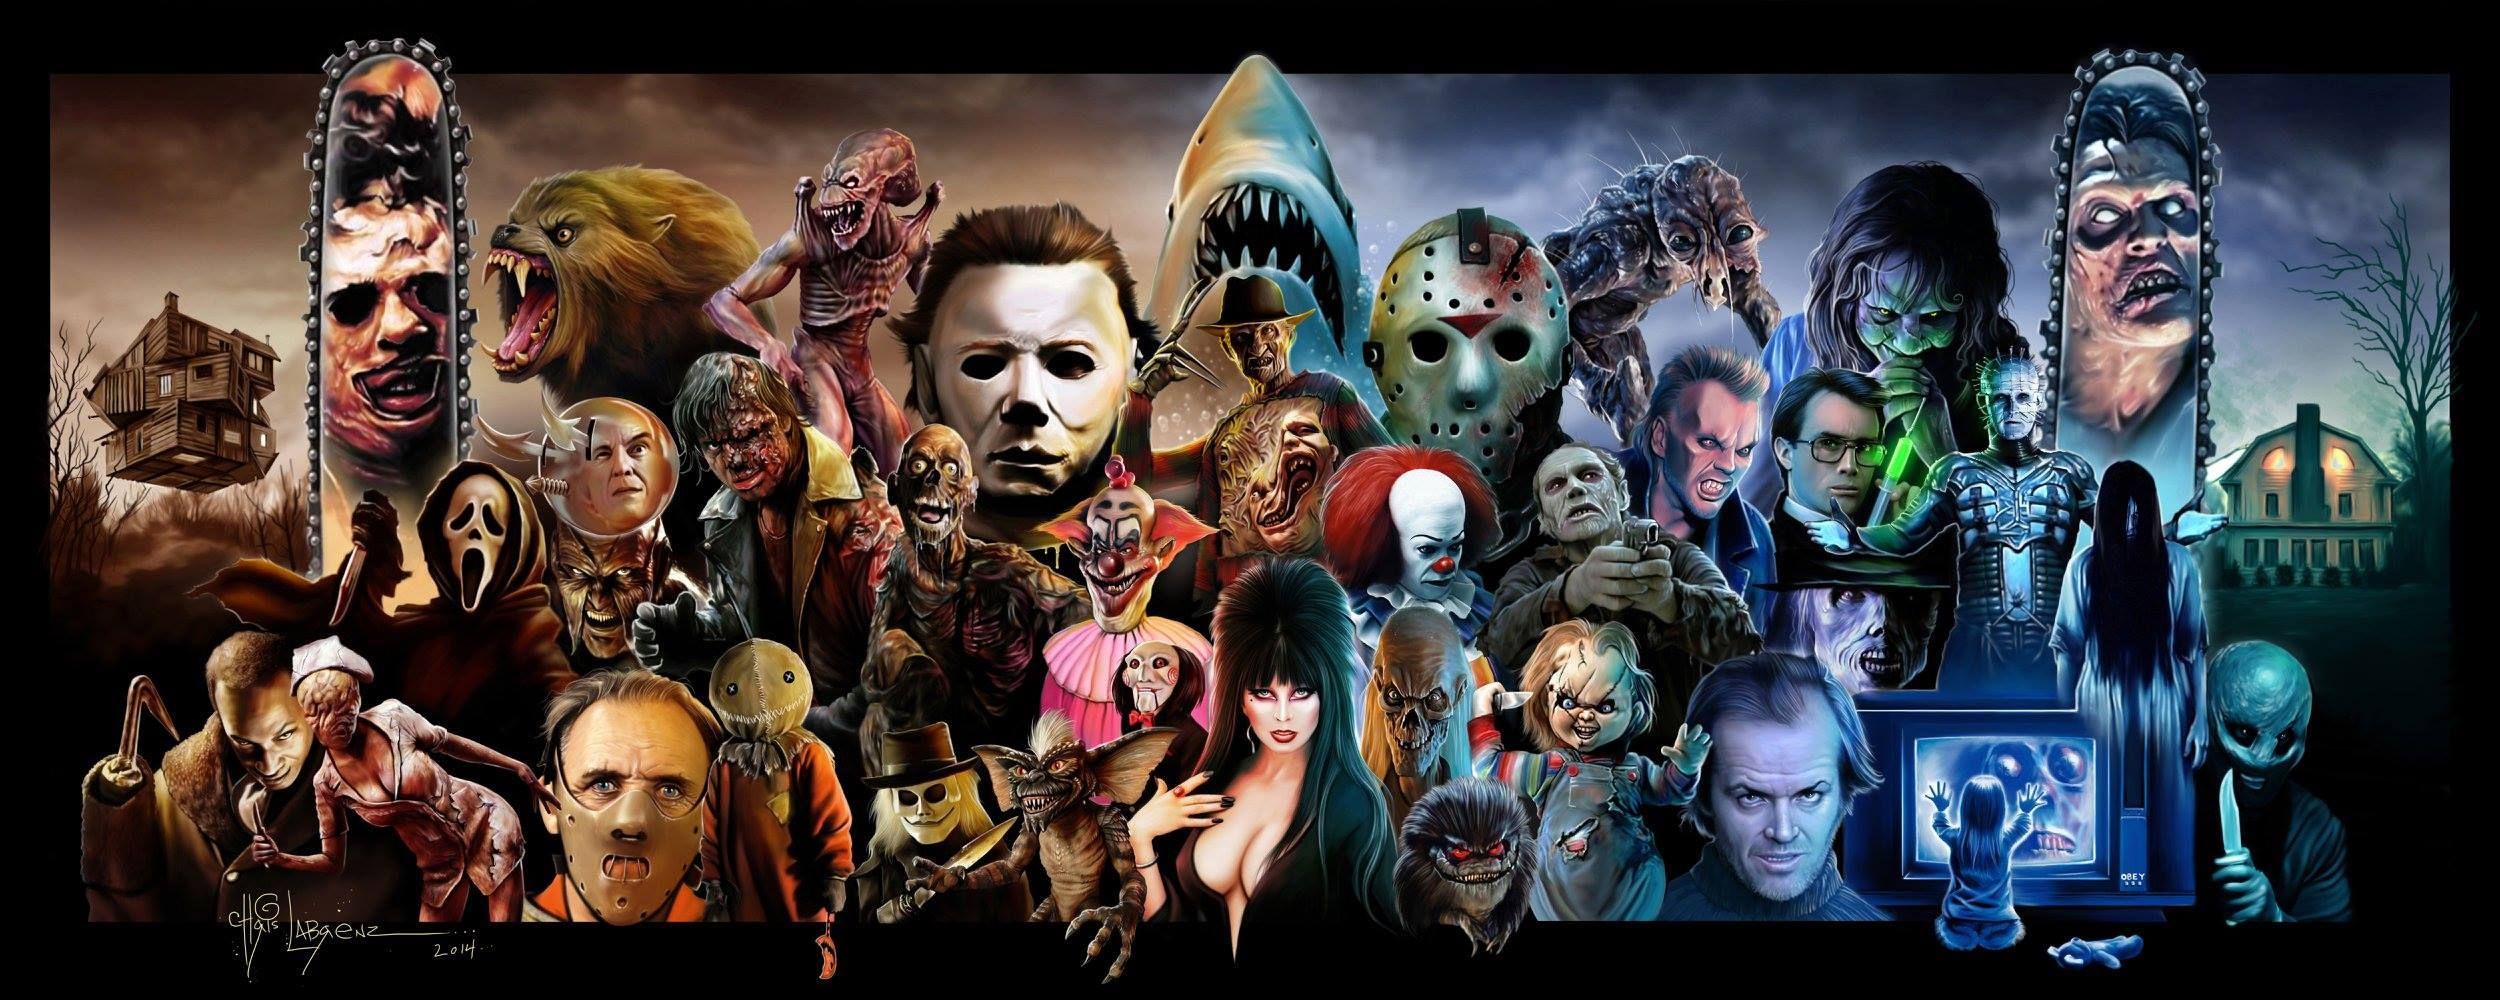 Classic Horror Movies Wallpaper HD Movie Collage